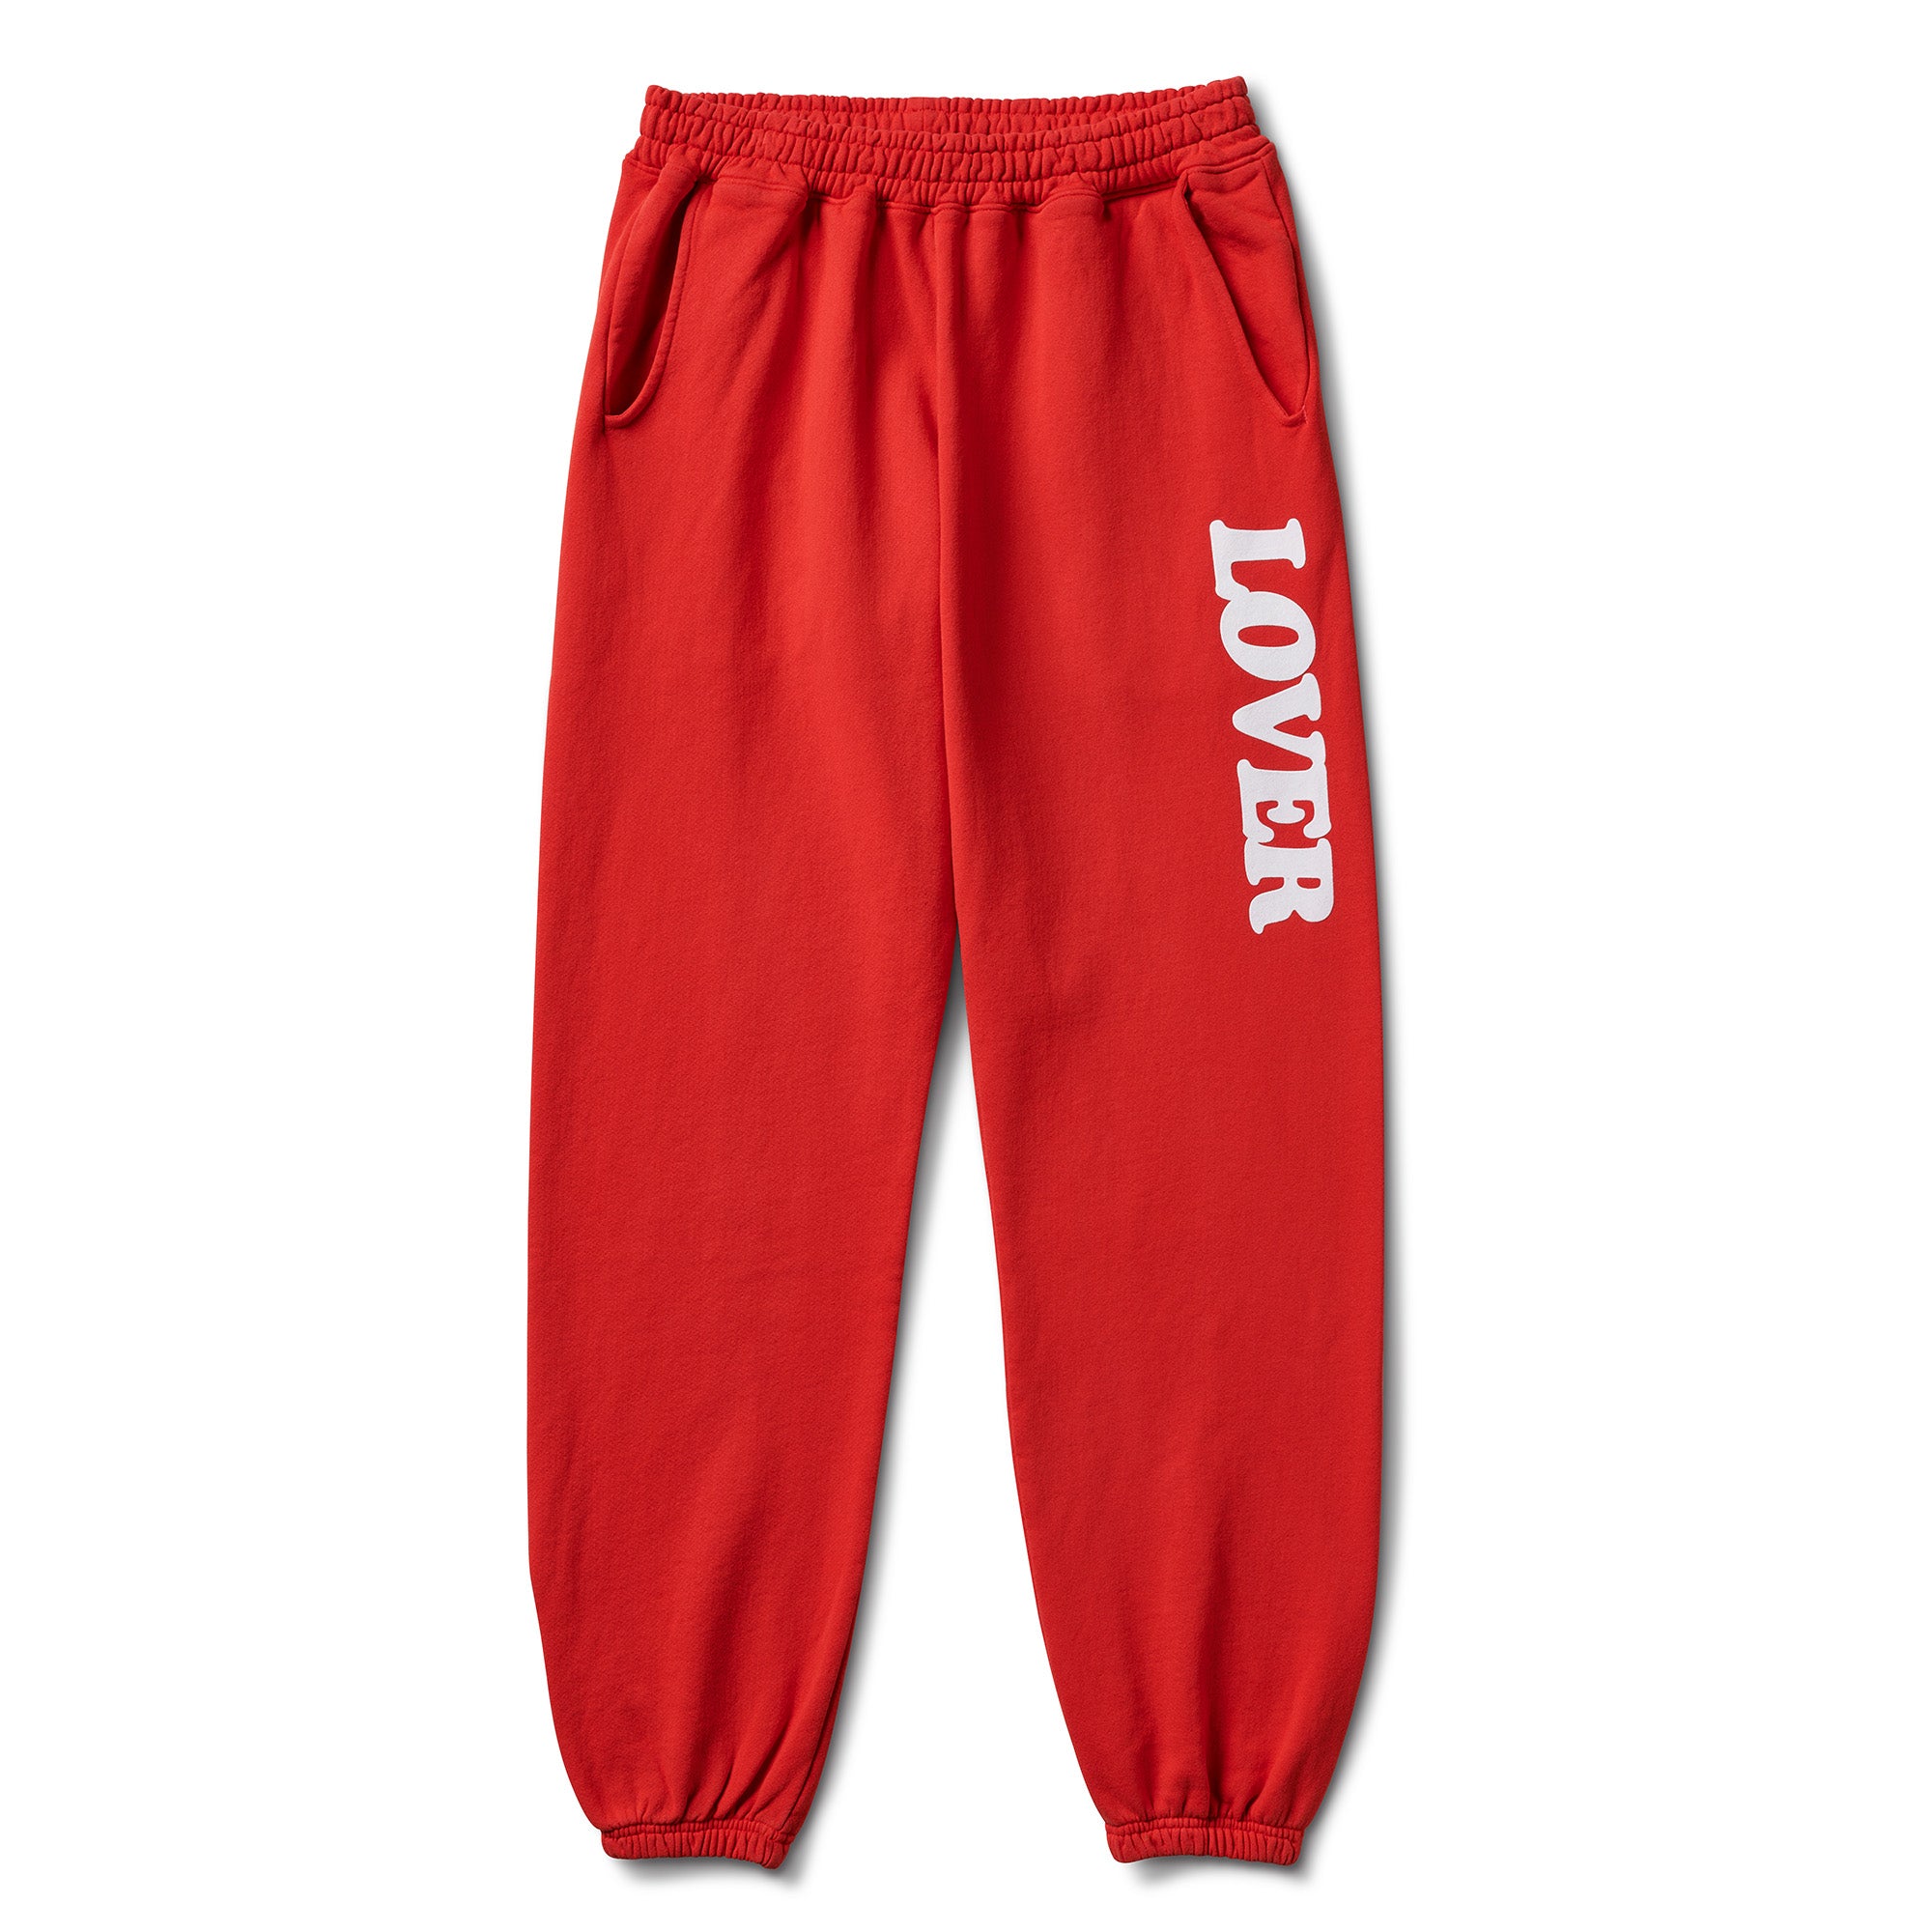 LOVER 10TH ANNIVERSARY SWEATPANTS - RED